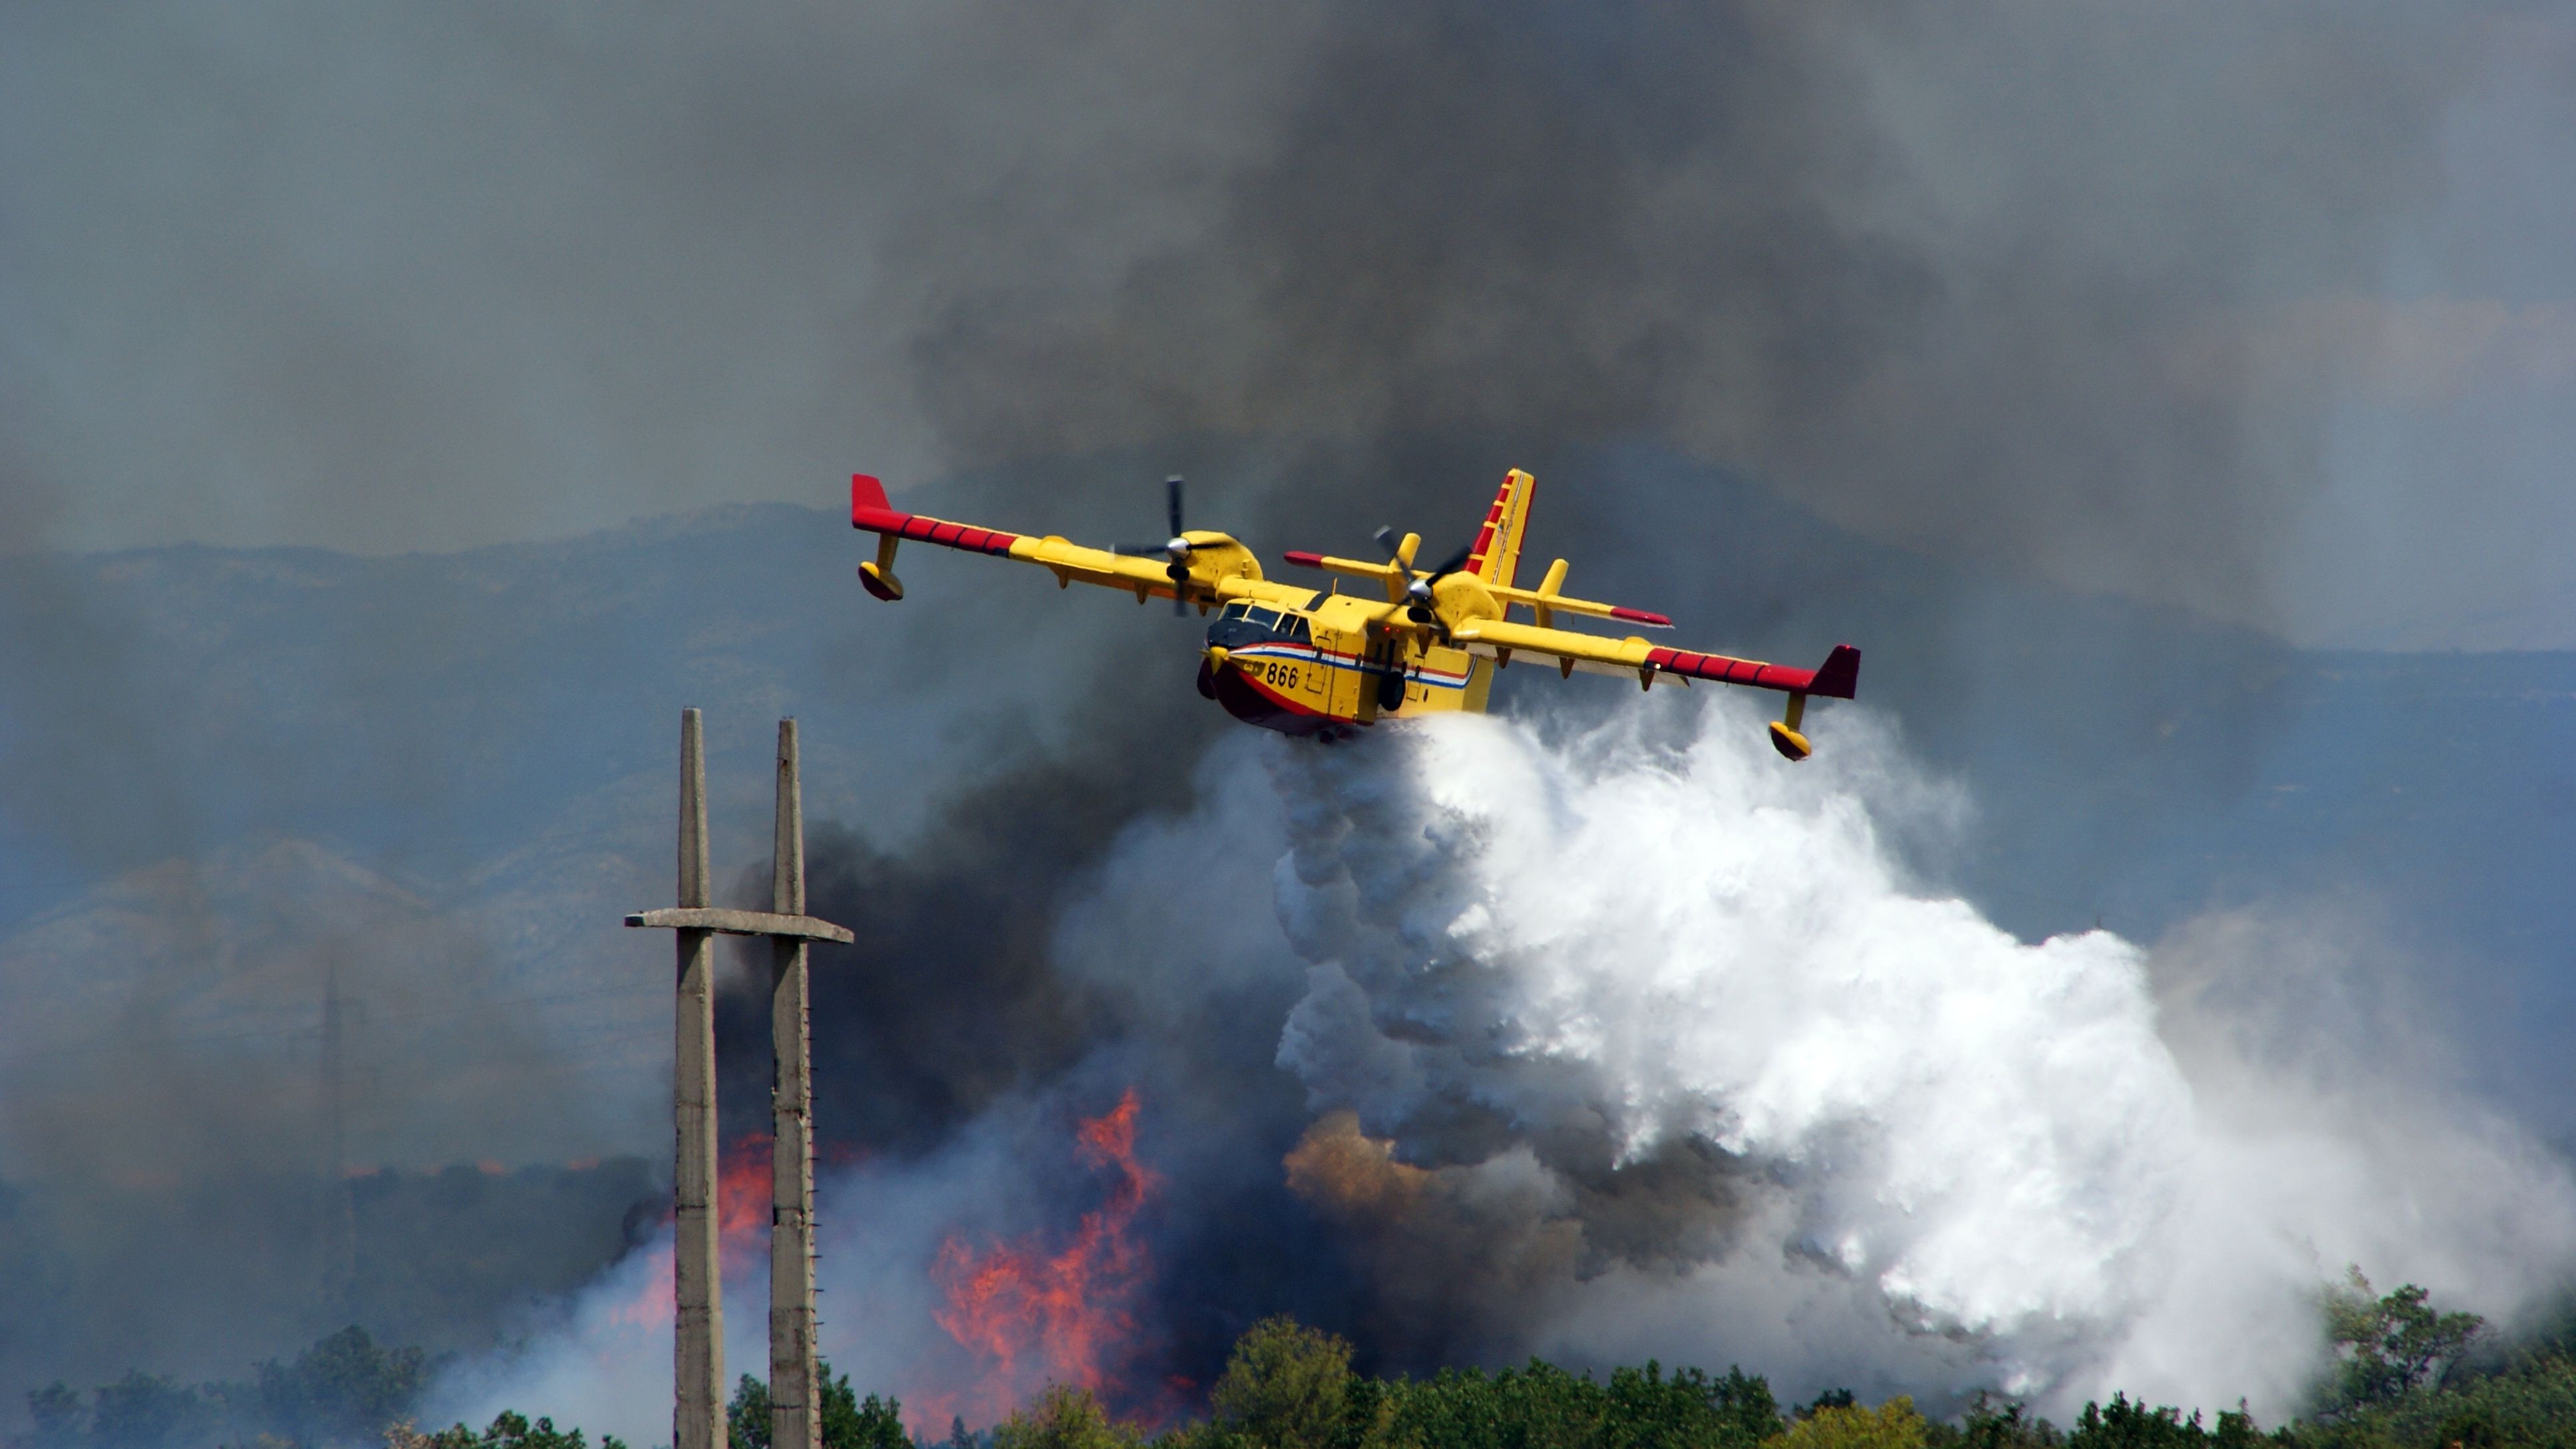 A CL-415 Being used to fight a fire.